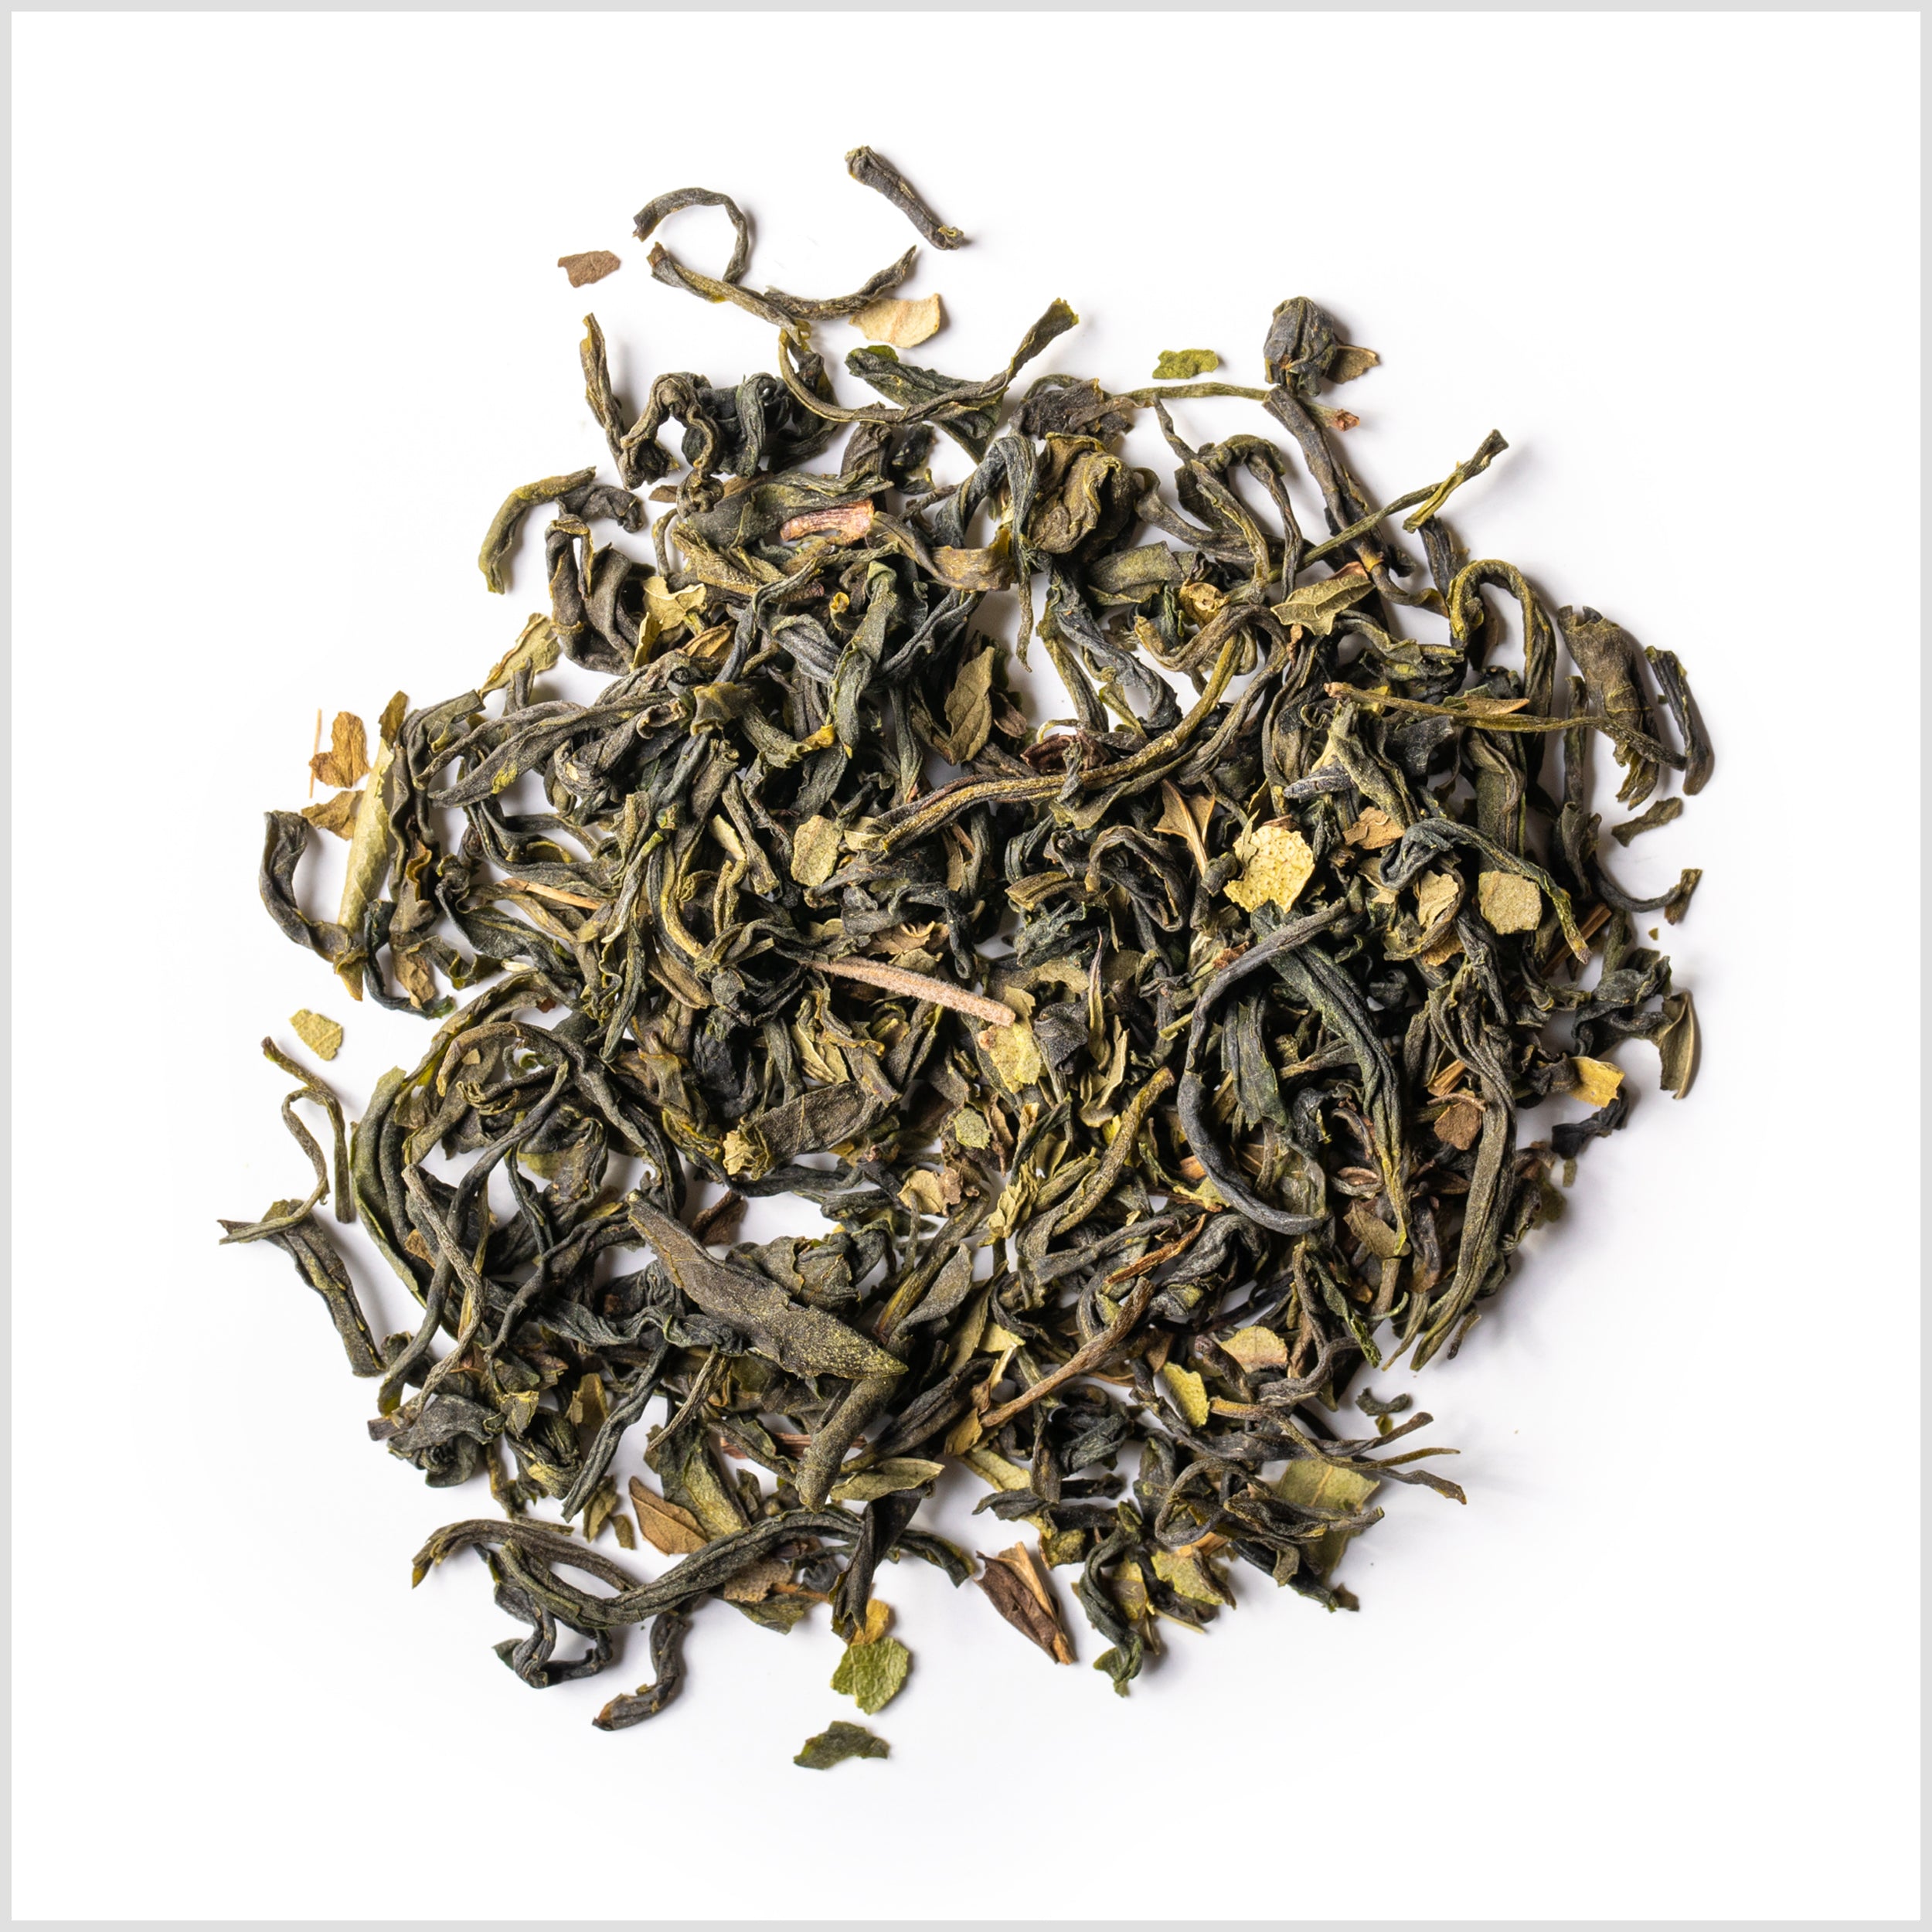 Circular pile of full leaf green tea with pieces of peppermint on white background.